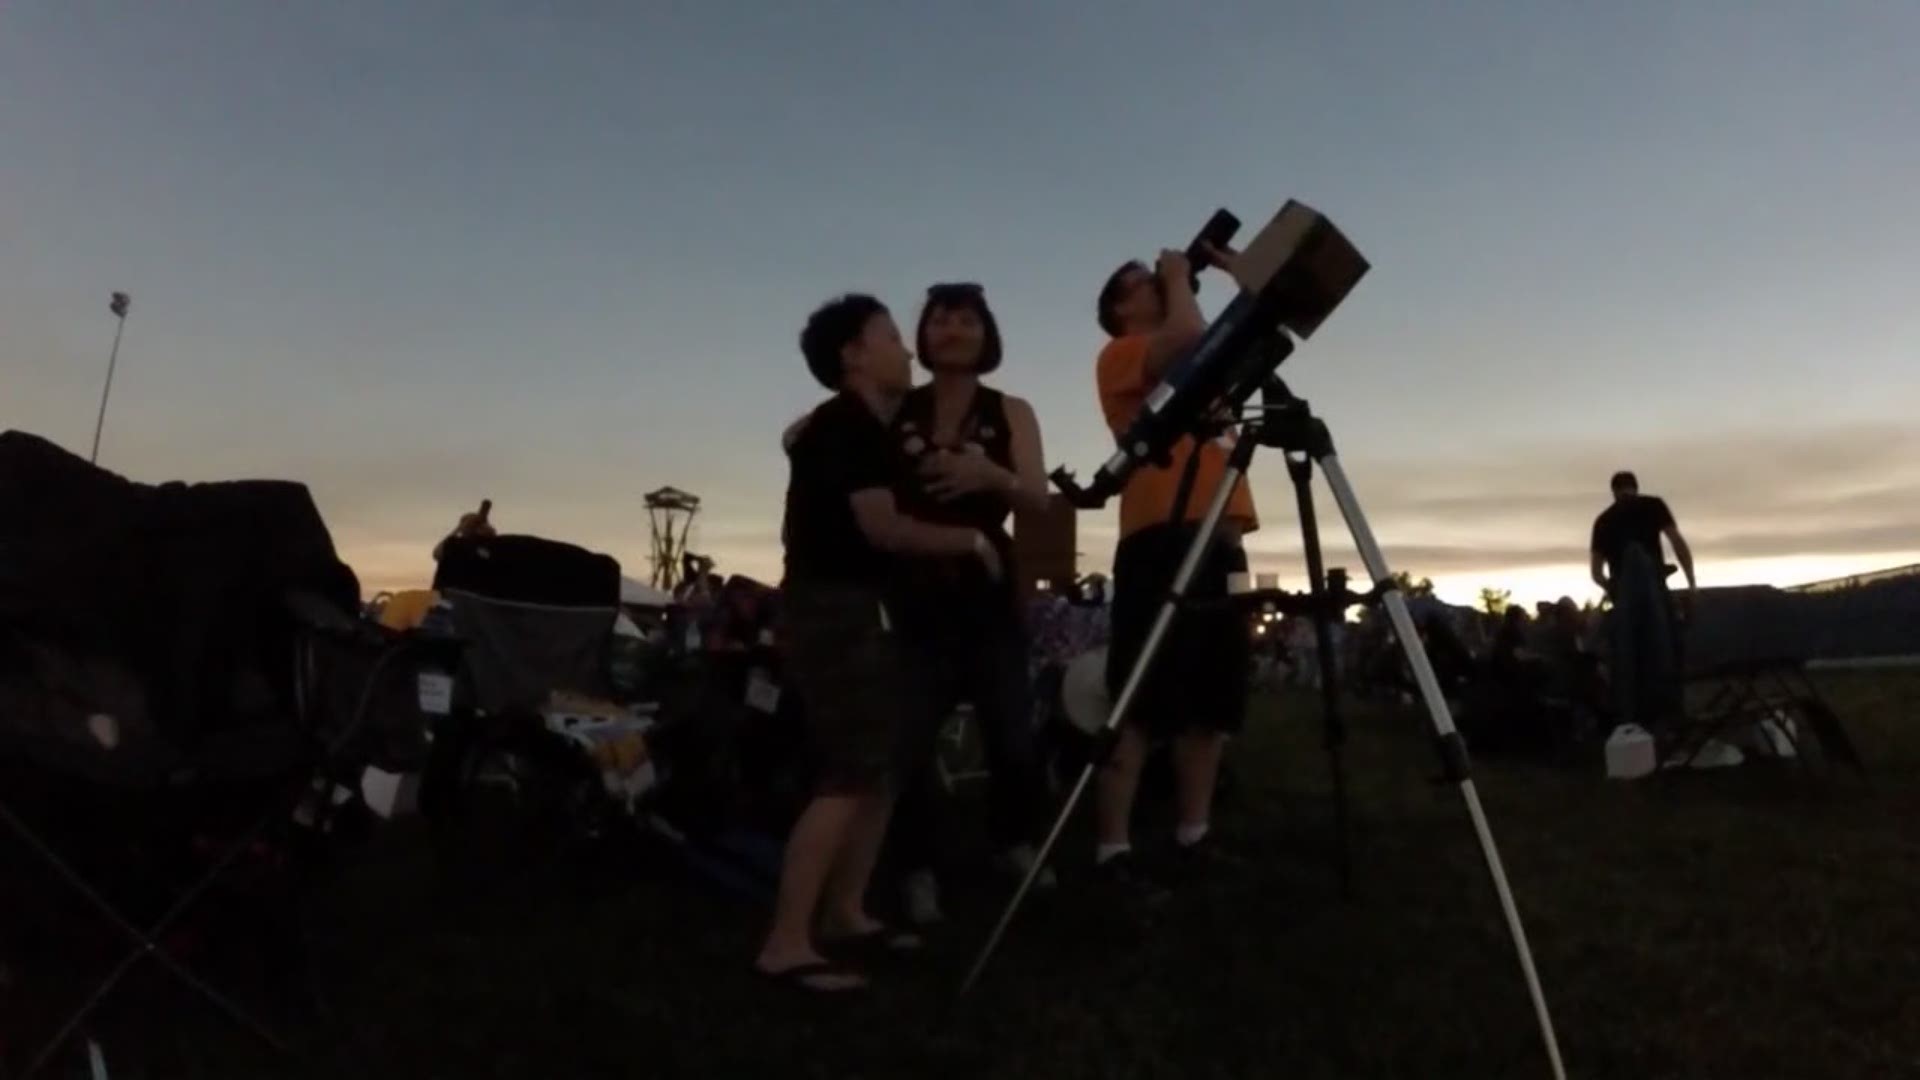 Oregon was the first place to see the 2017 total solar eclipse, and 100,000 people converged on tiny Madras, Oregon.